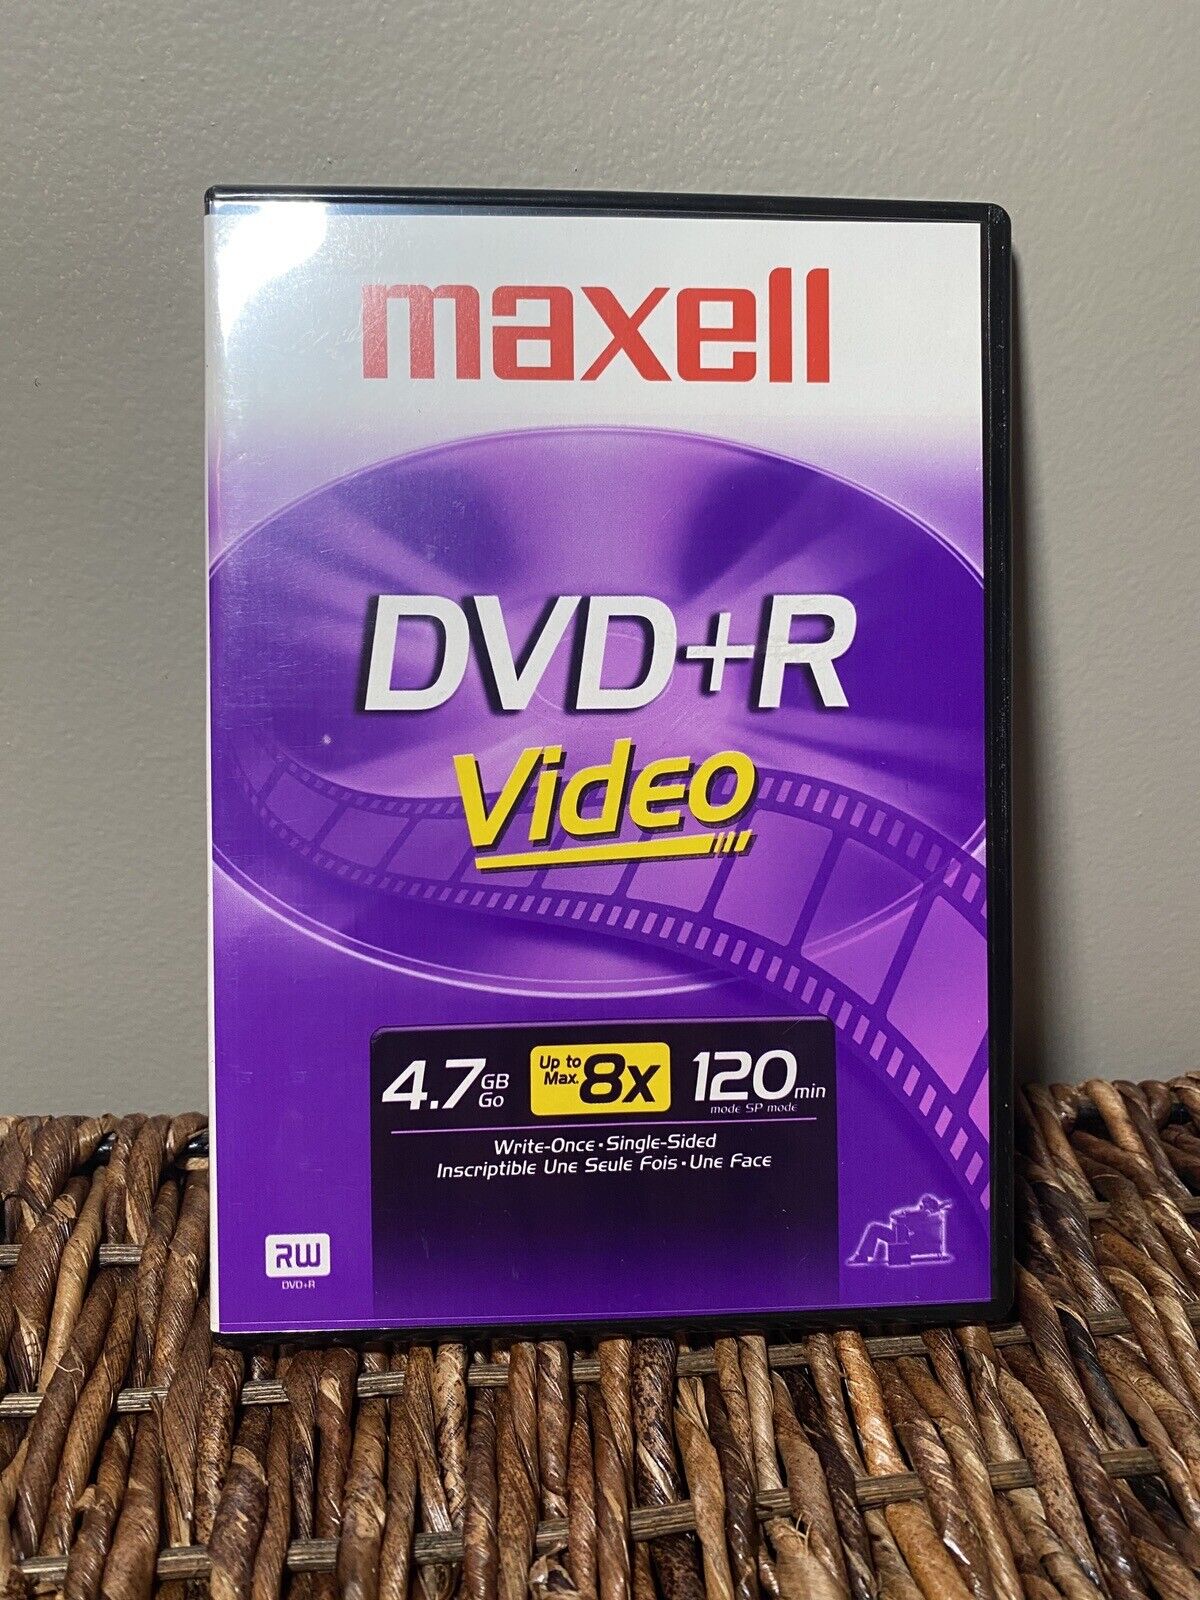 Maxell DVD+R Video Maxell New 4.7 GB 8x 120 min Write Once Single Sided 